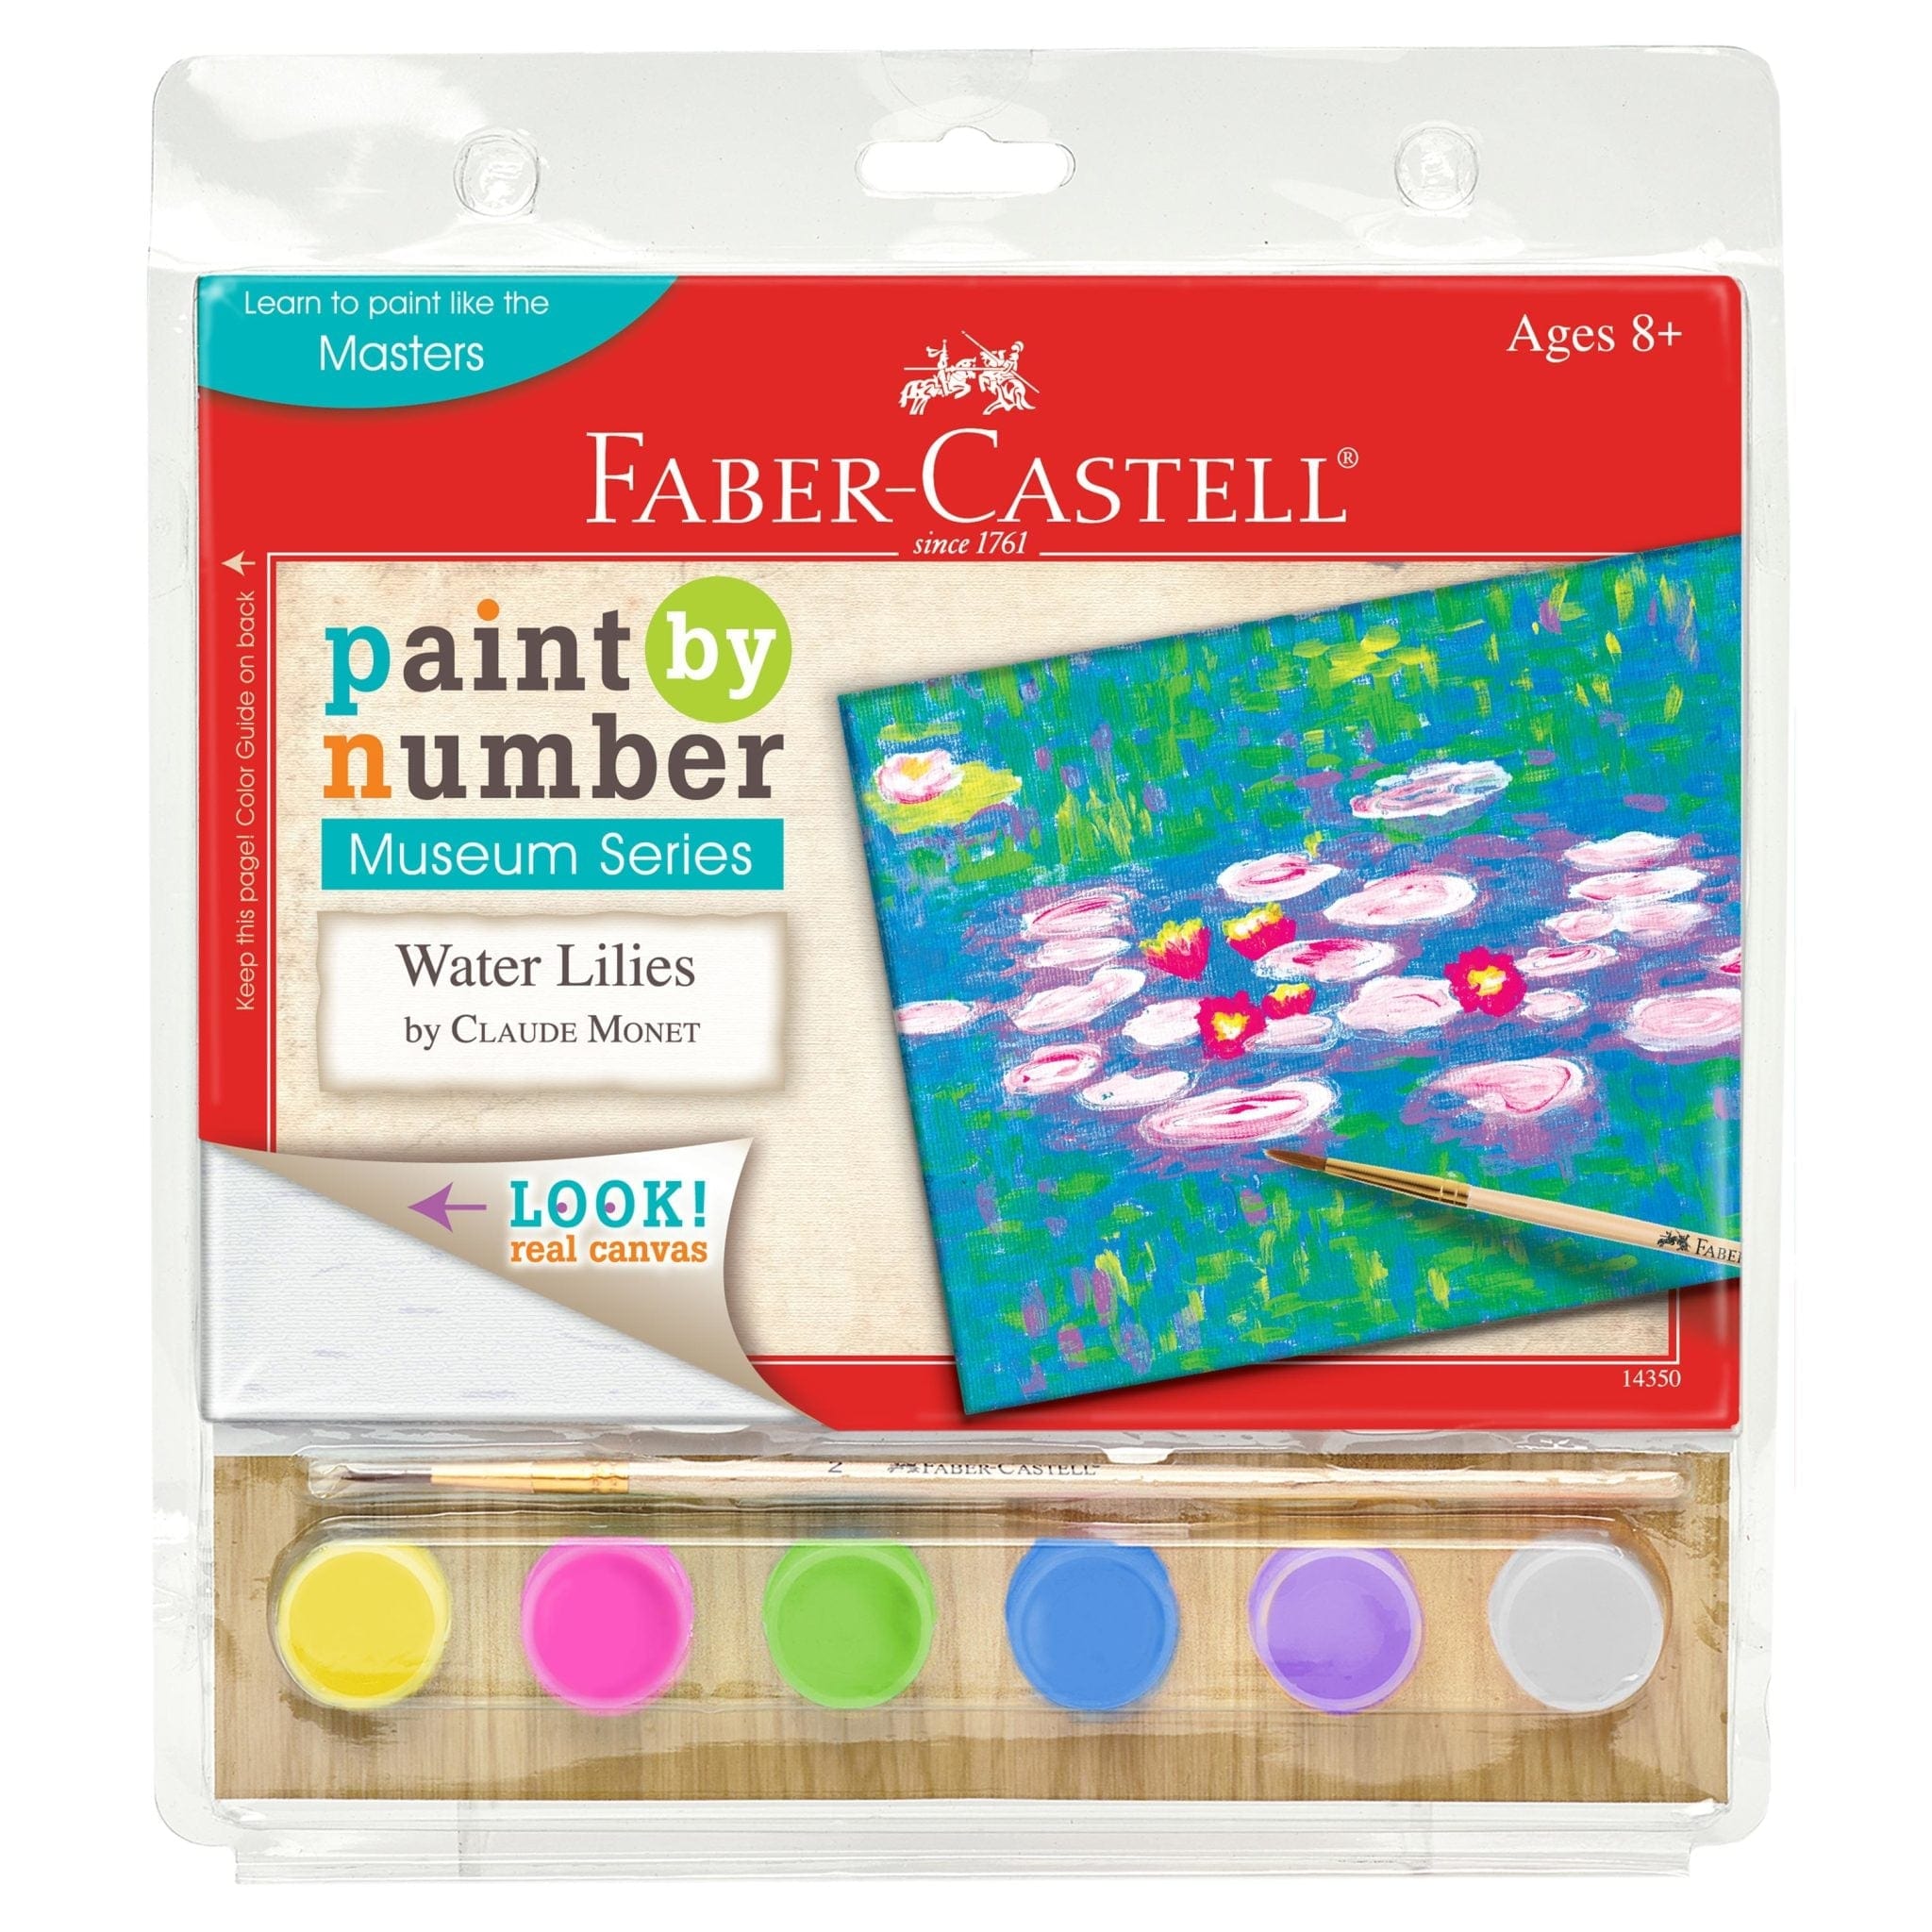 Faber Castell Faber Castell Paint by Number Museum Series Water Lilies - Little Miss Muffin Children & Home